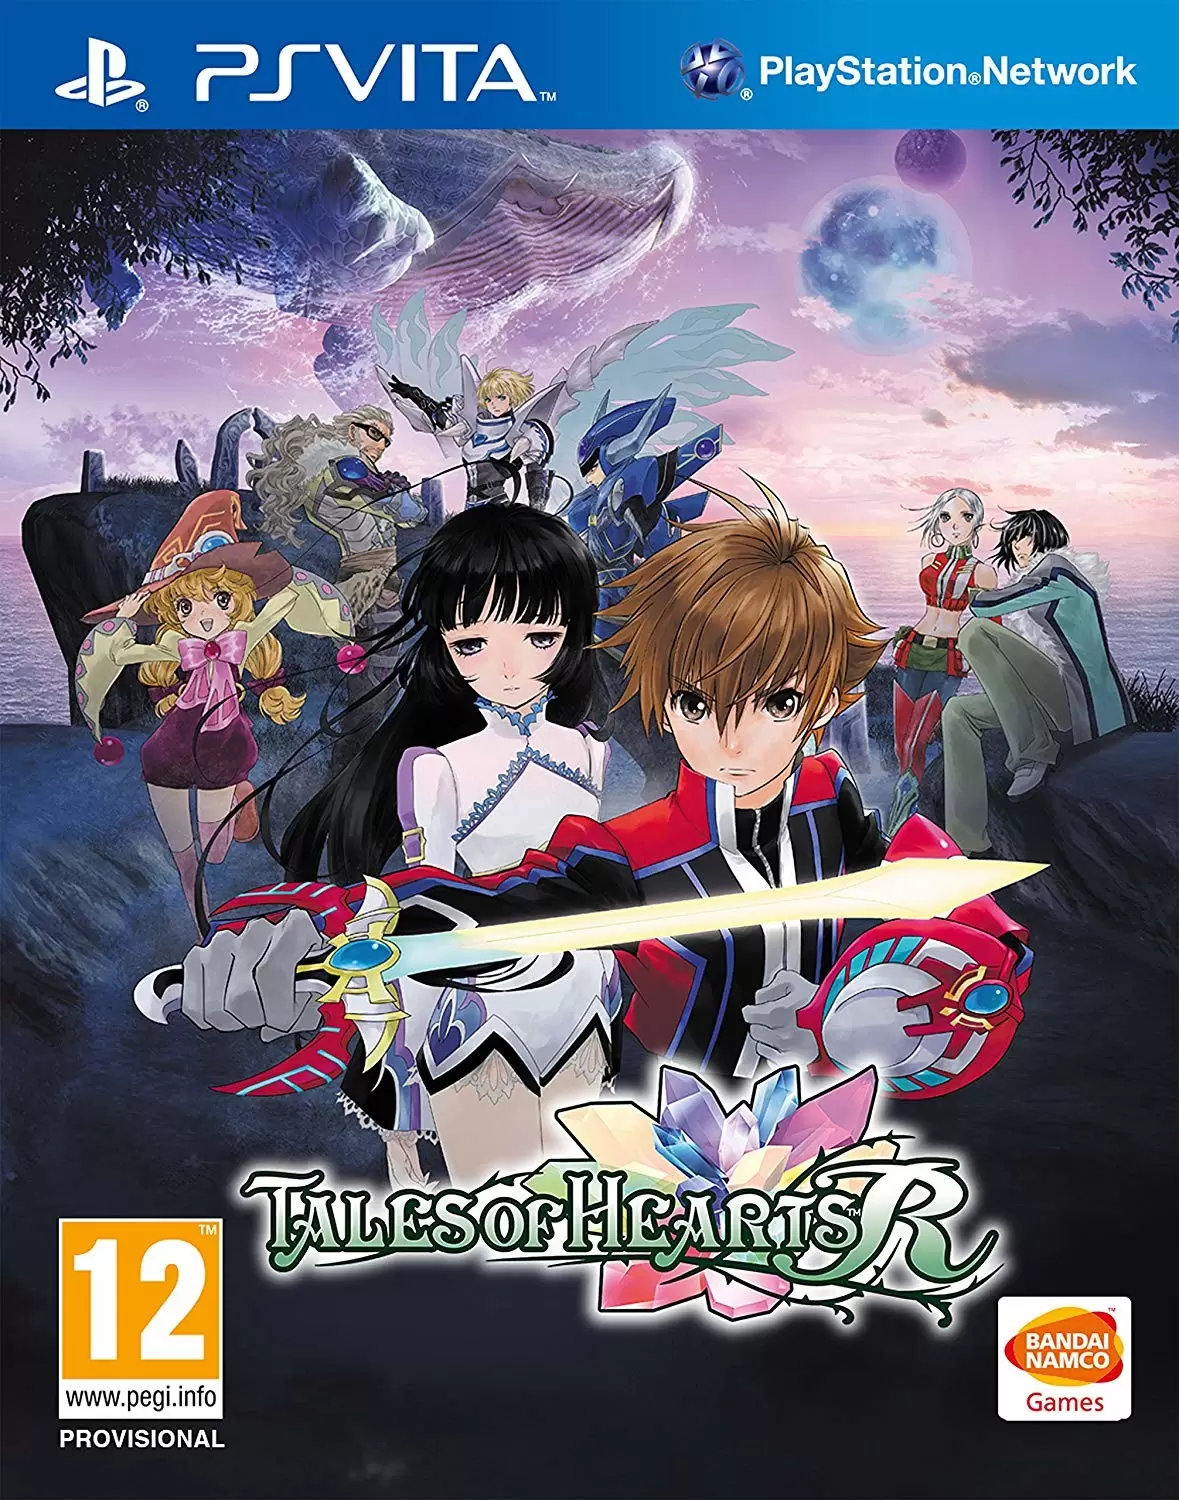 PS Vita Games - Tales of Hearts R - Soma Link Day One